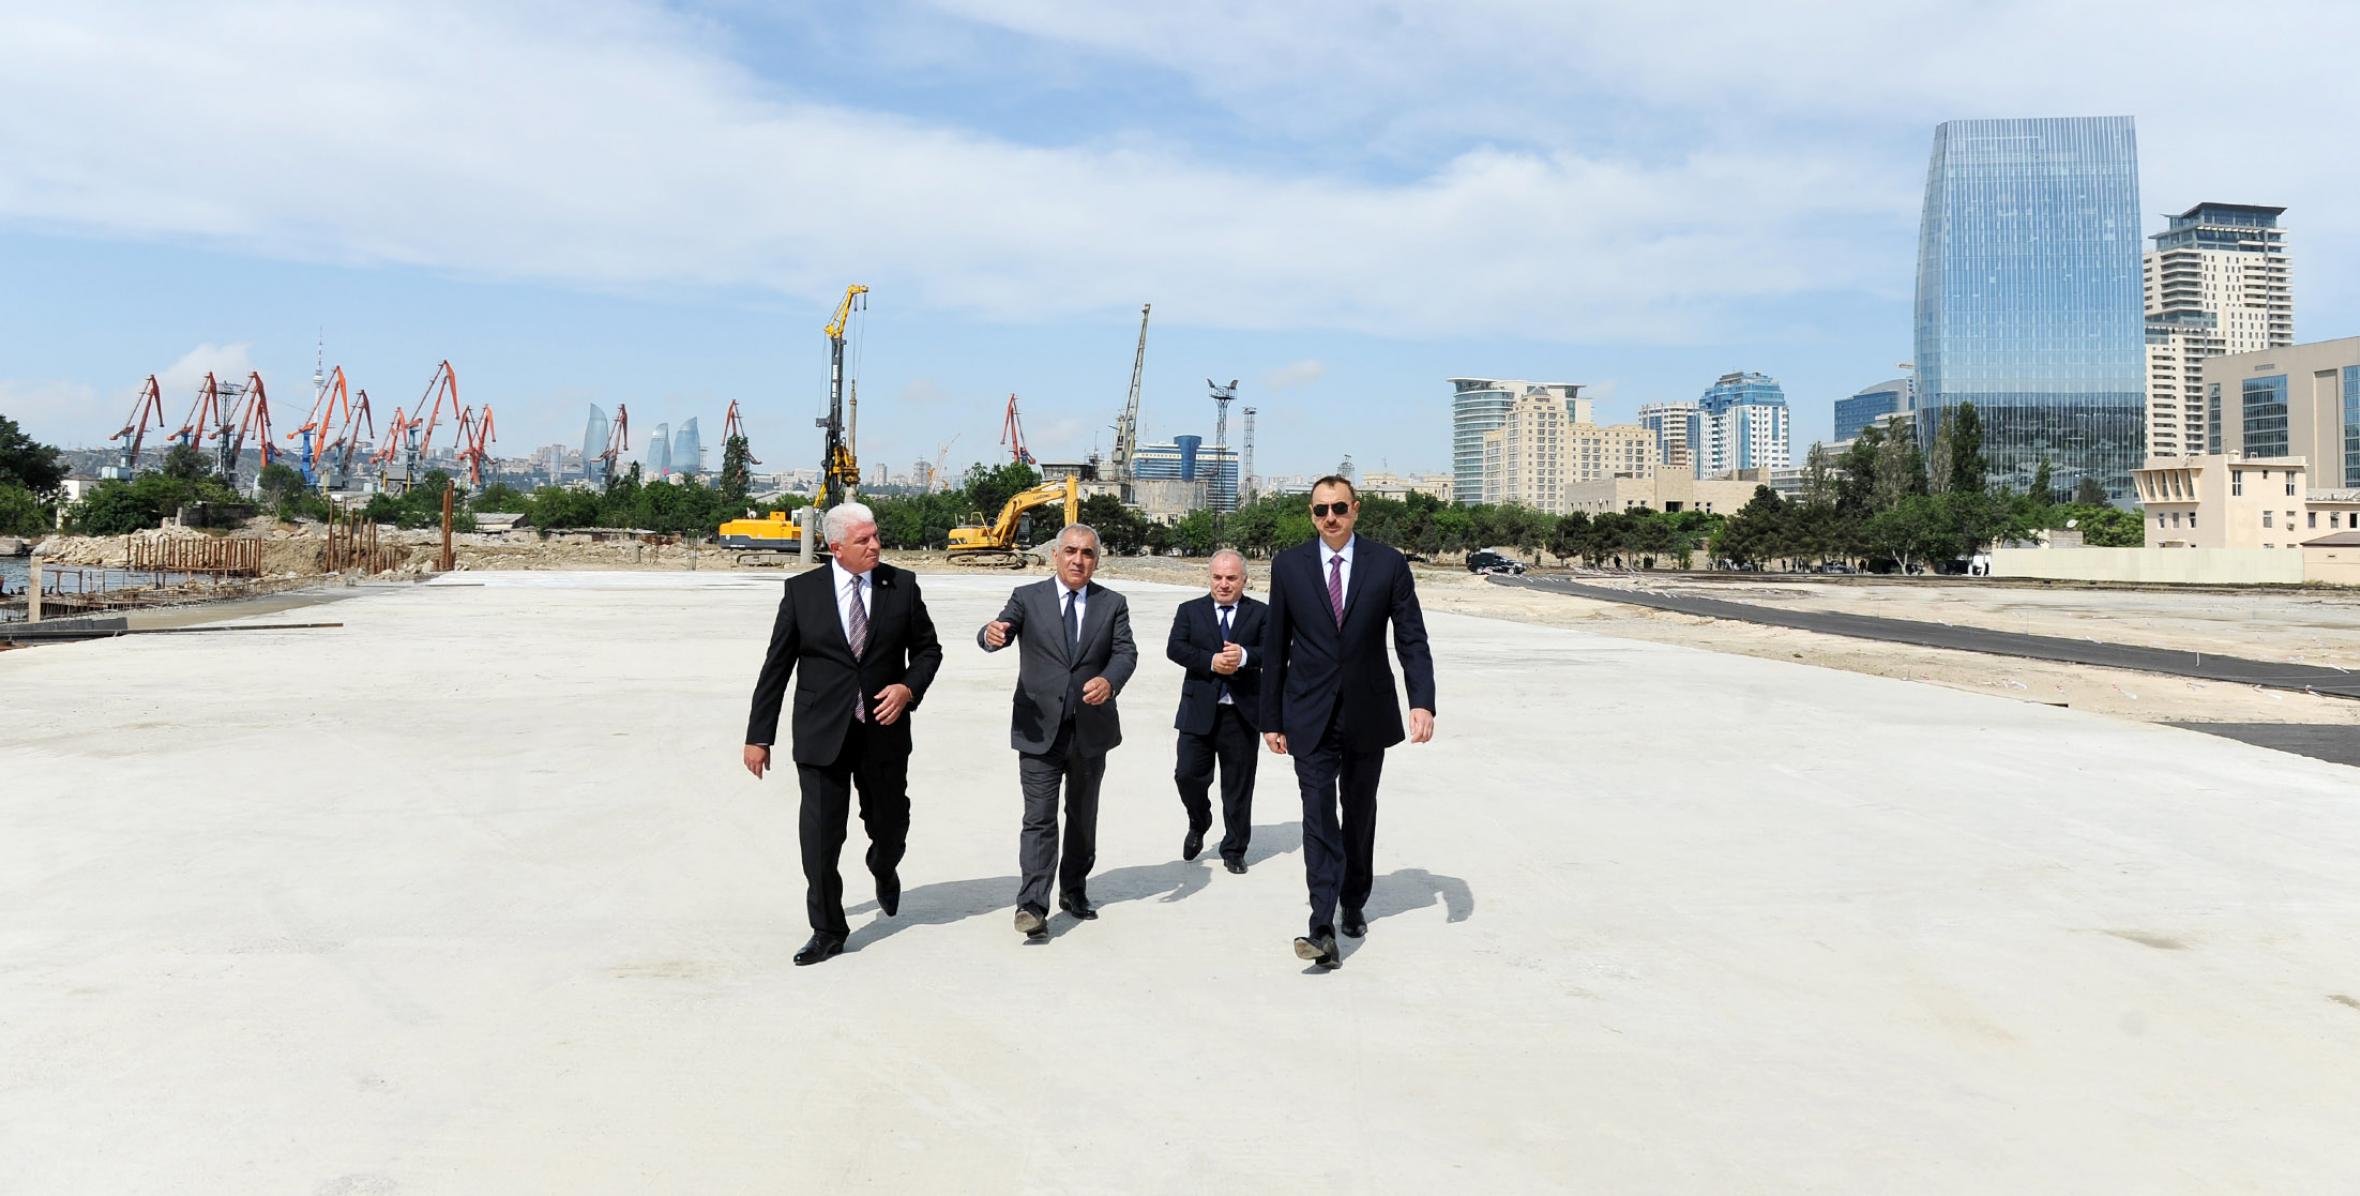 Ilham Aliyev attended a groundbreaking ceremony for the White City Boulevard in Baku